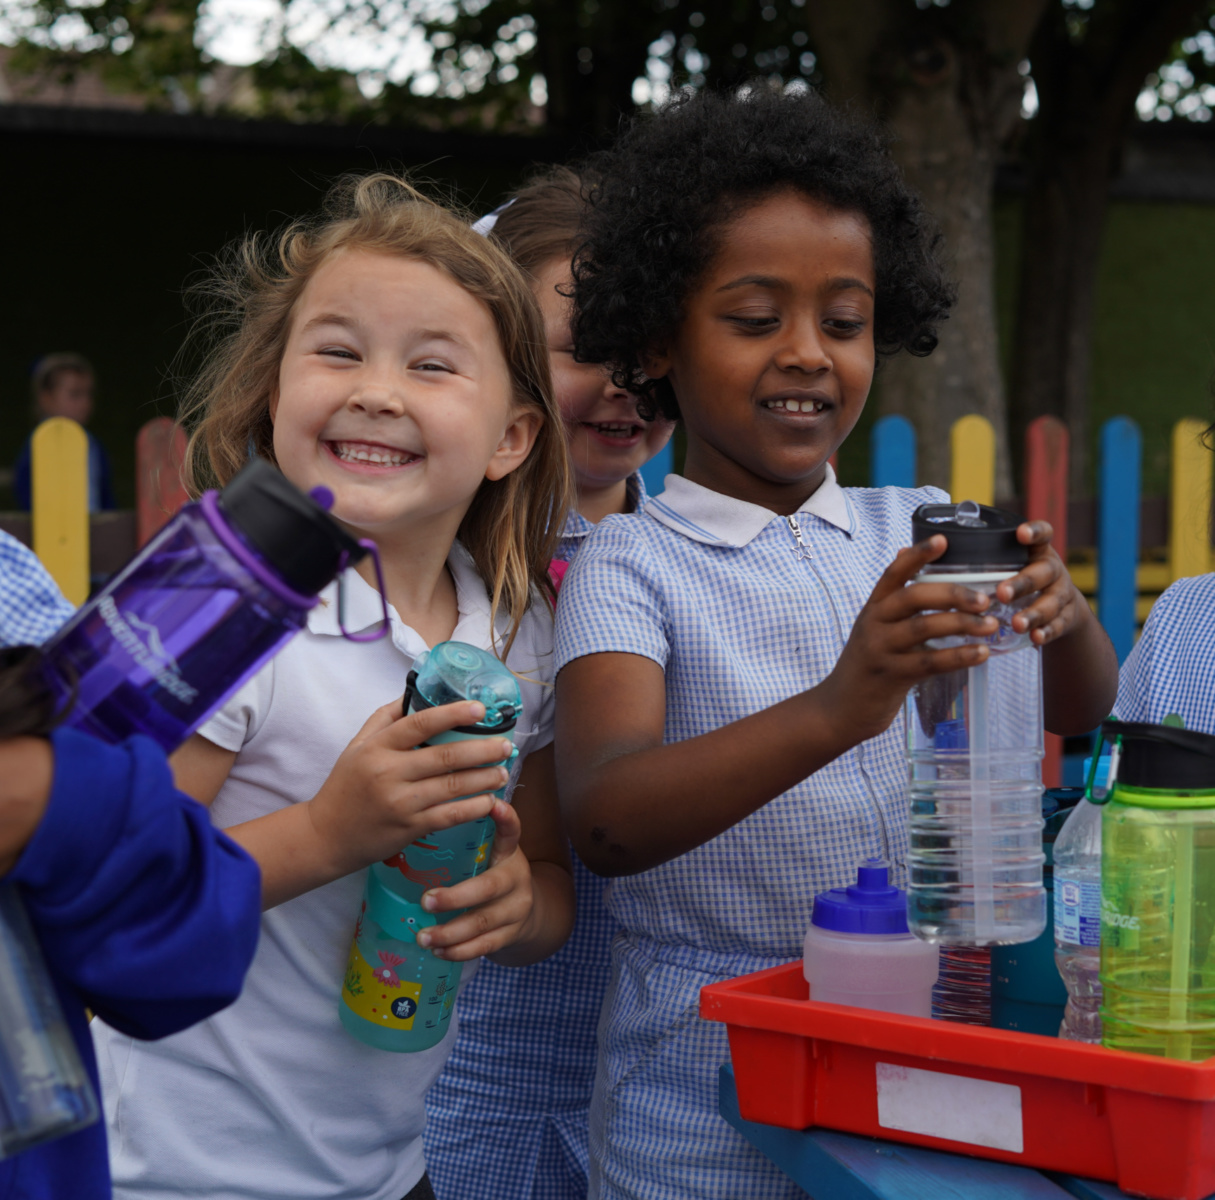 Two young girls are pictured wearing their academy uniform and smiling for the camera outdoors, whilst filling up their water bottles.